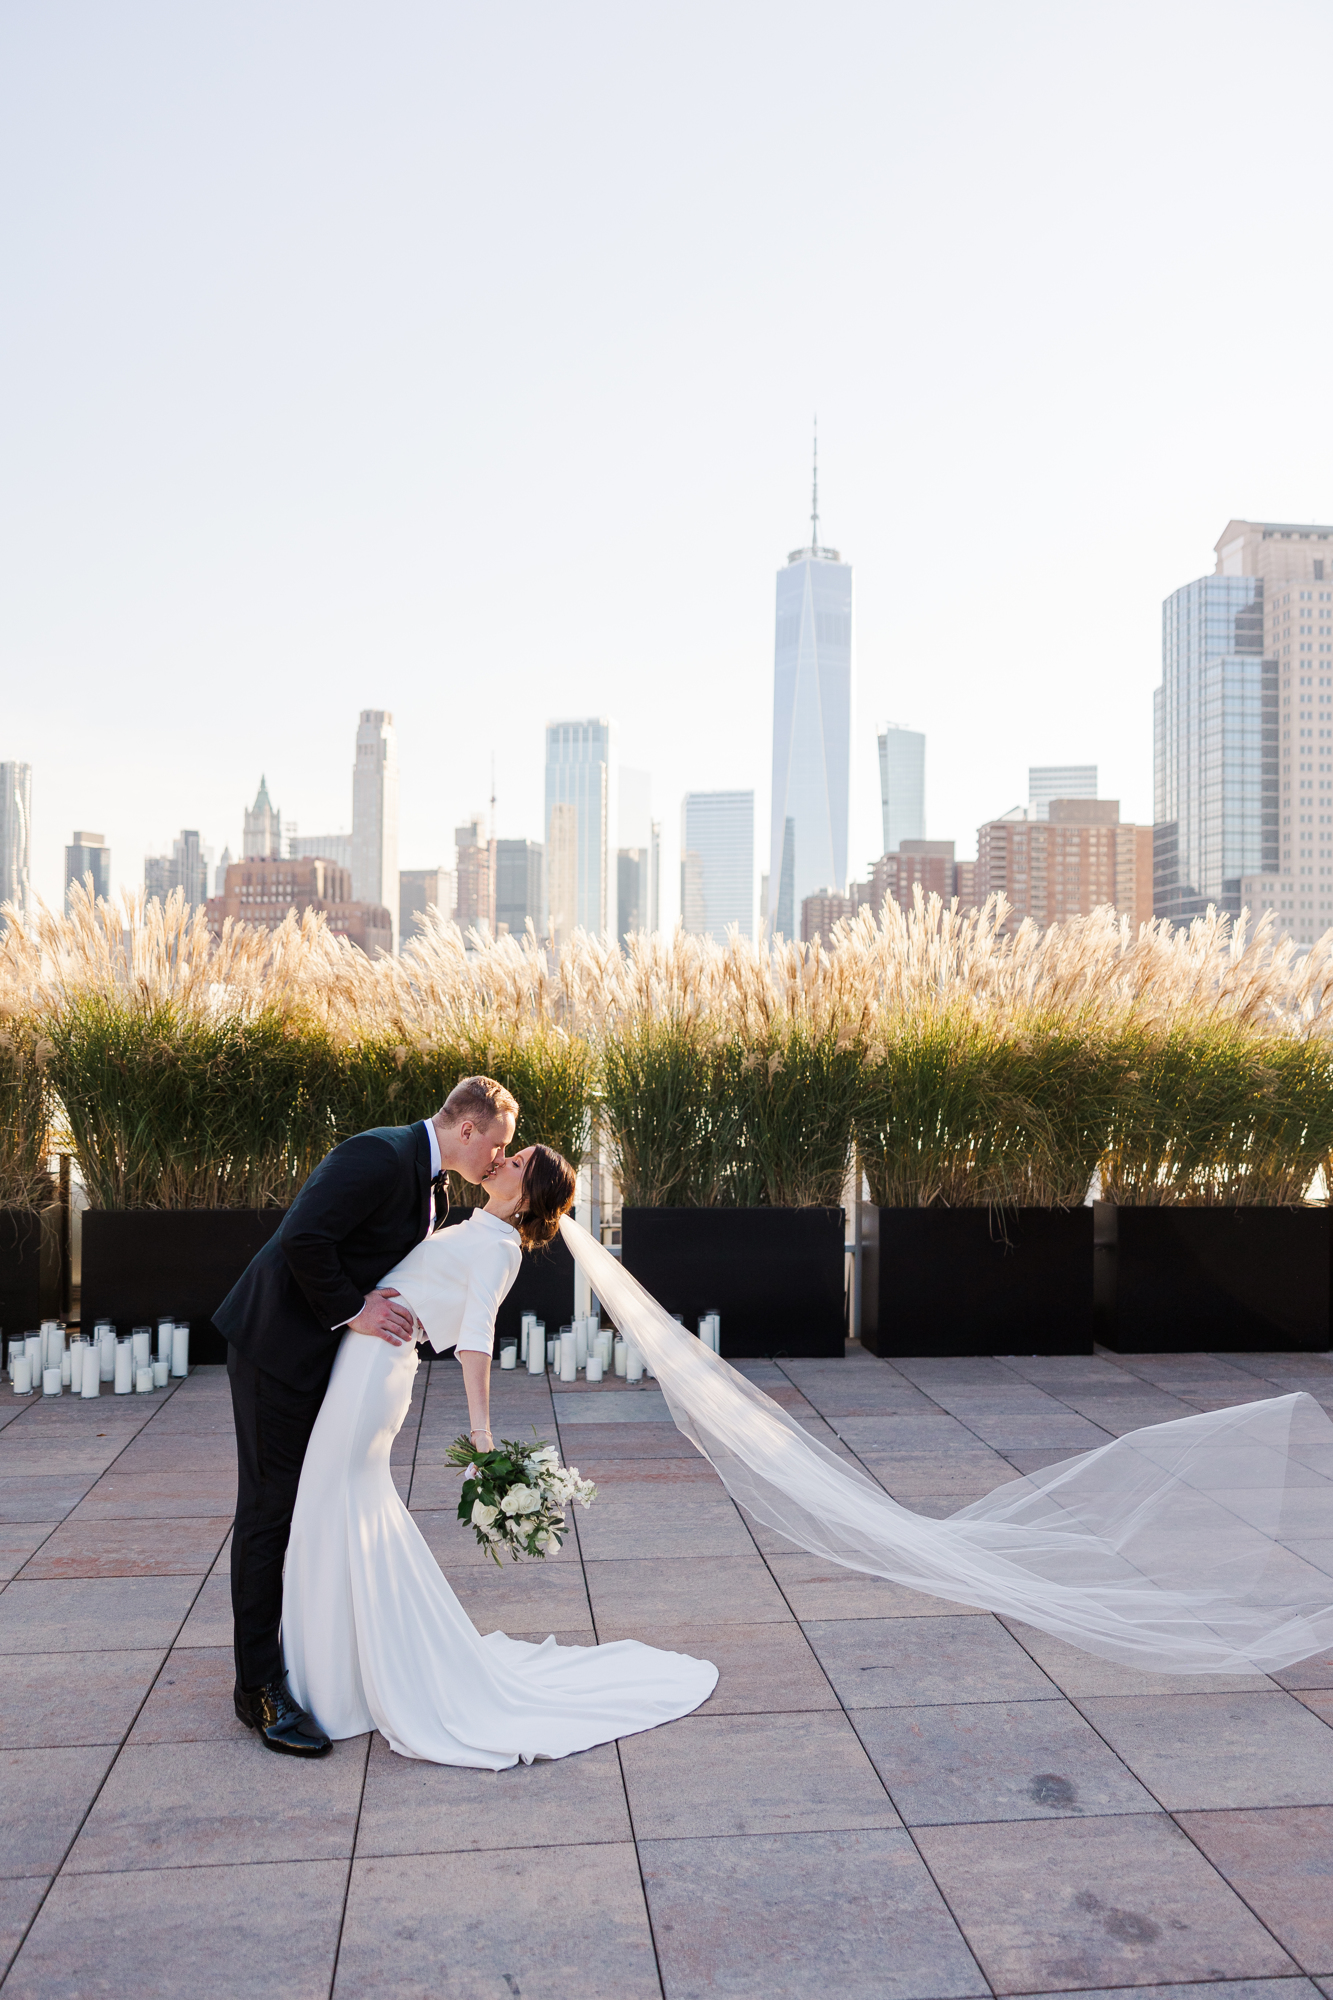 Warm and bright Wedding Reception Photos at Tribeca Rooftop